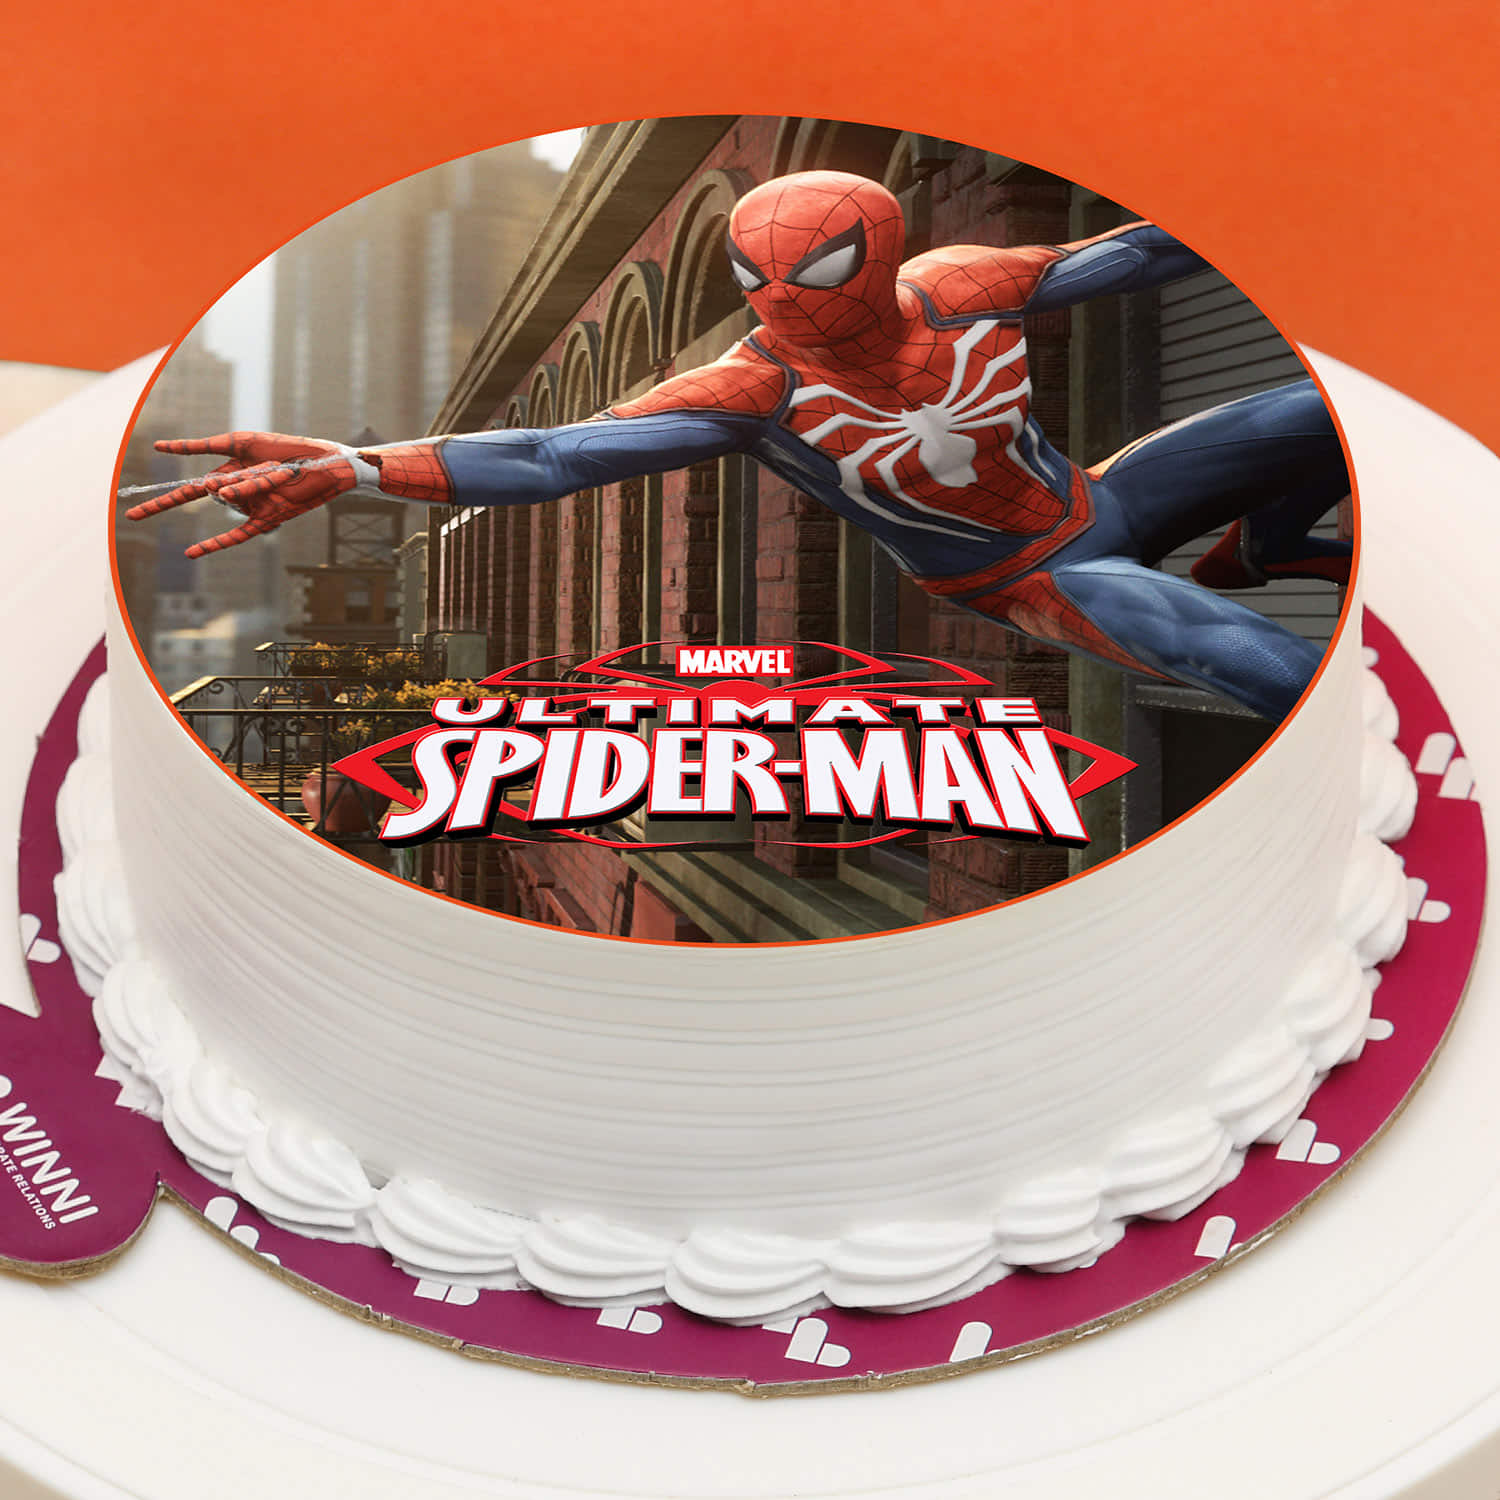 Spider Super Hero Friends Image Edible Cake Topper Birthday Cake Decoration  Edible Spidey Sticker Decal For 1/4 to 1/2 sheet Cake 10